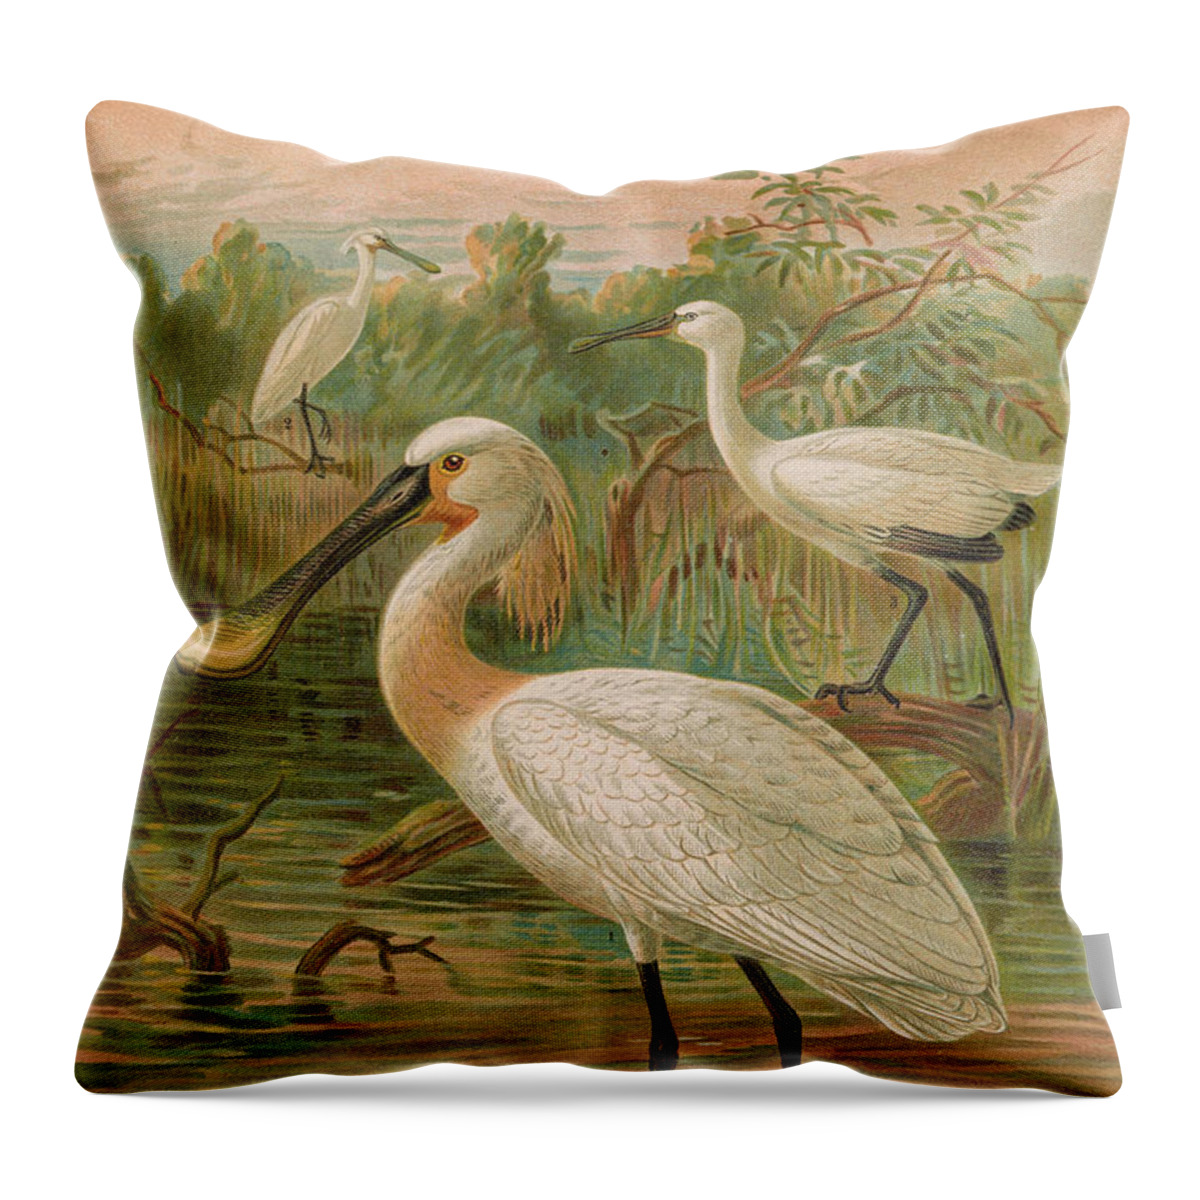 Eurasian Spoonbill Throw Pillow featuring the painting Eurasian Spoonbill by Dreyer Wildlife Print Collections 